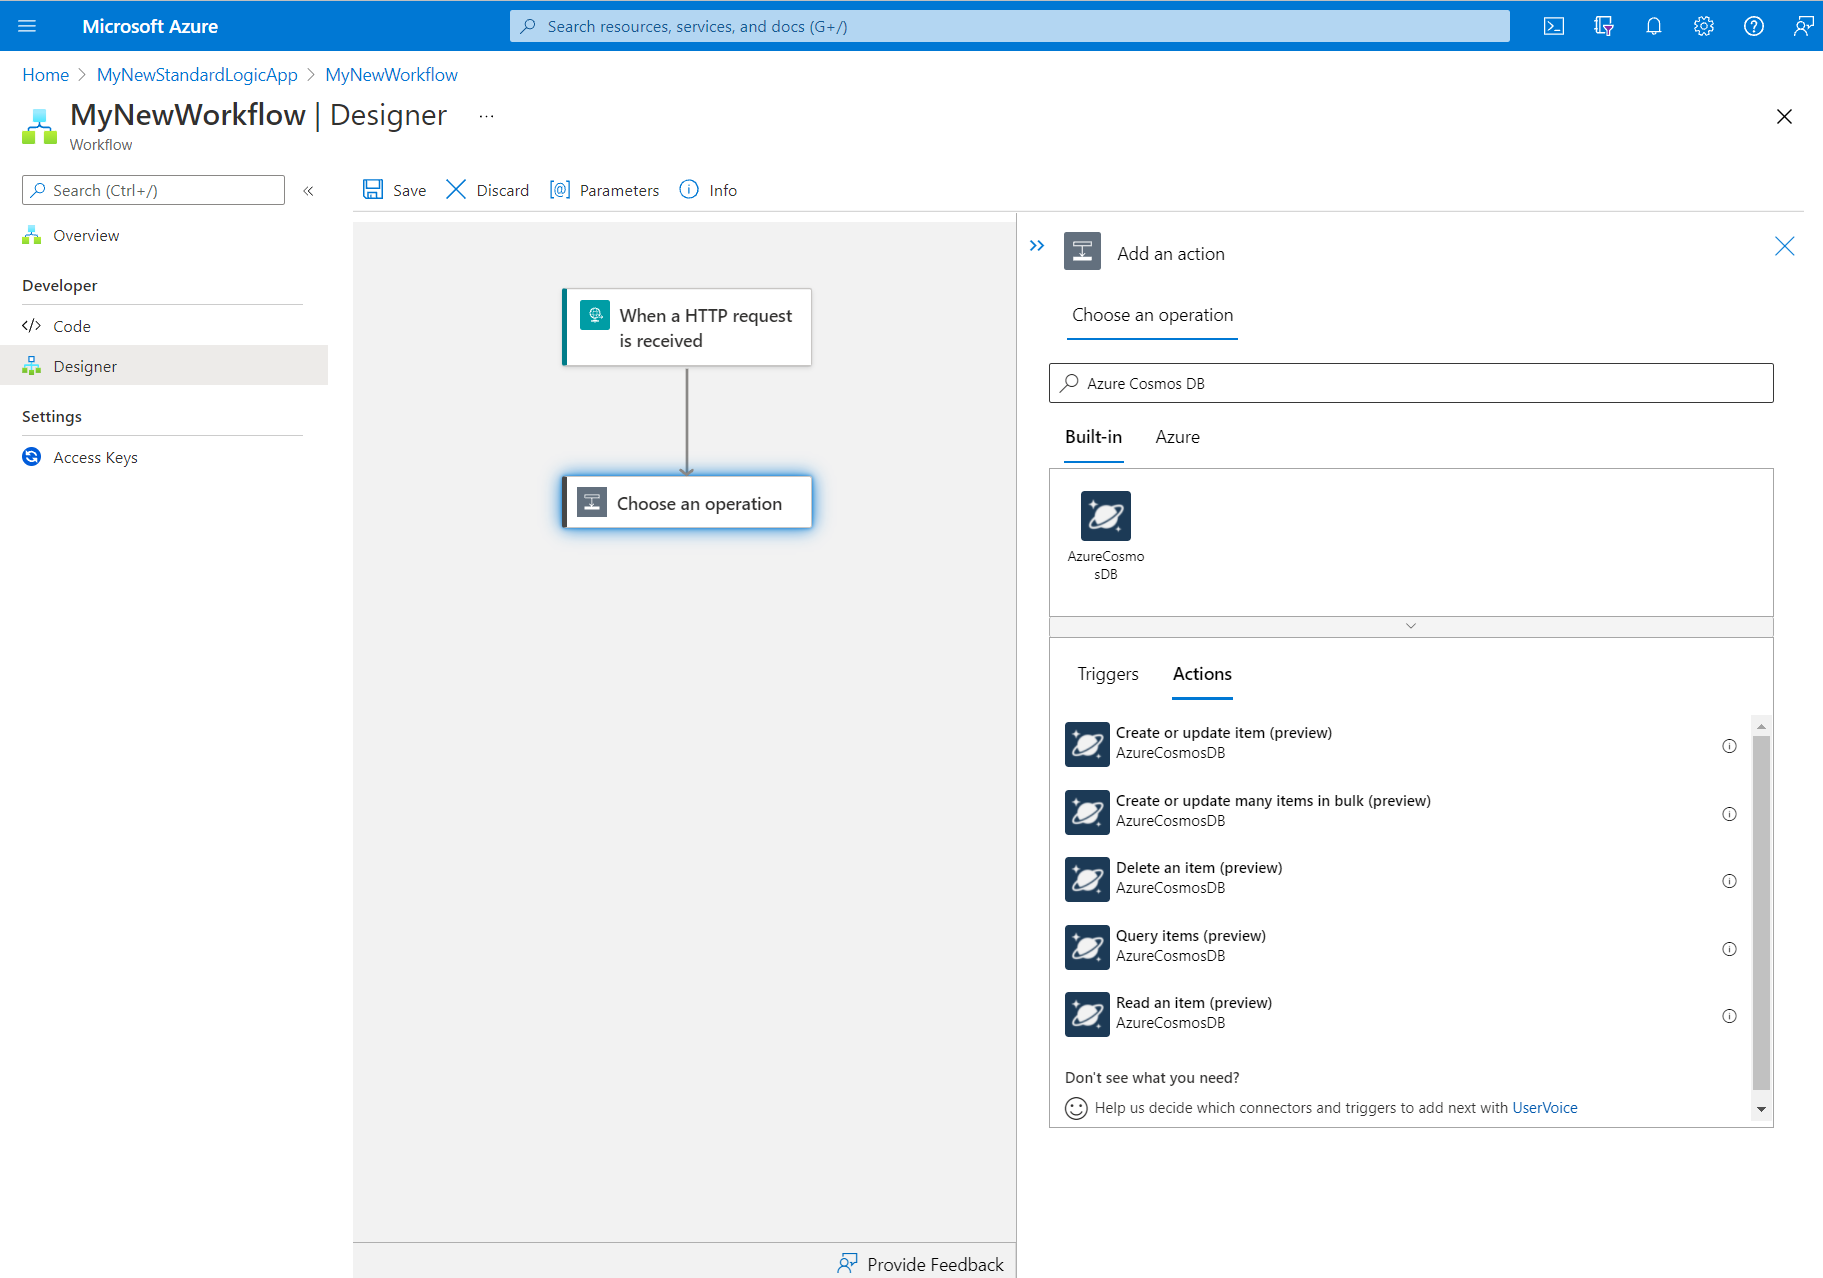 Screenshot showing the designer for a Standard logic app workflow and available Azure Cosmos DB actions.